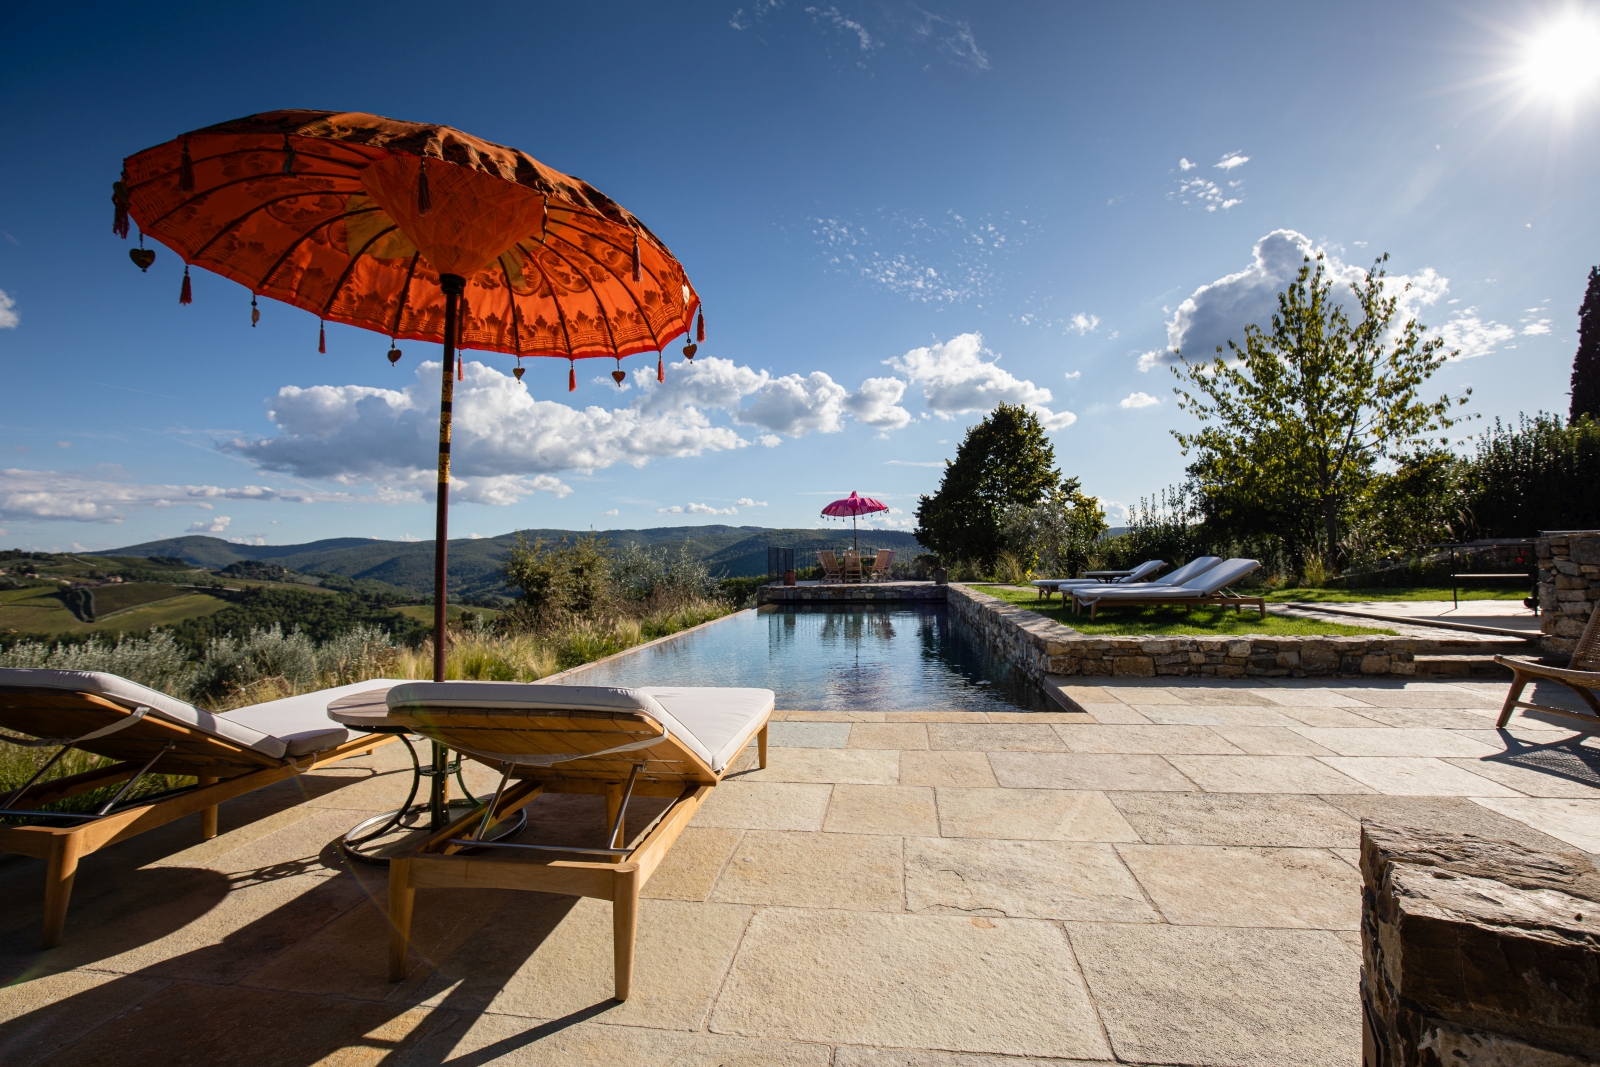 Pool and pool area with sun loungers, umbrellas and countryside view at La Regina in Tuscany, Italy